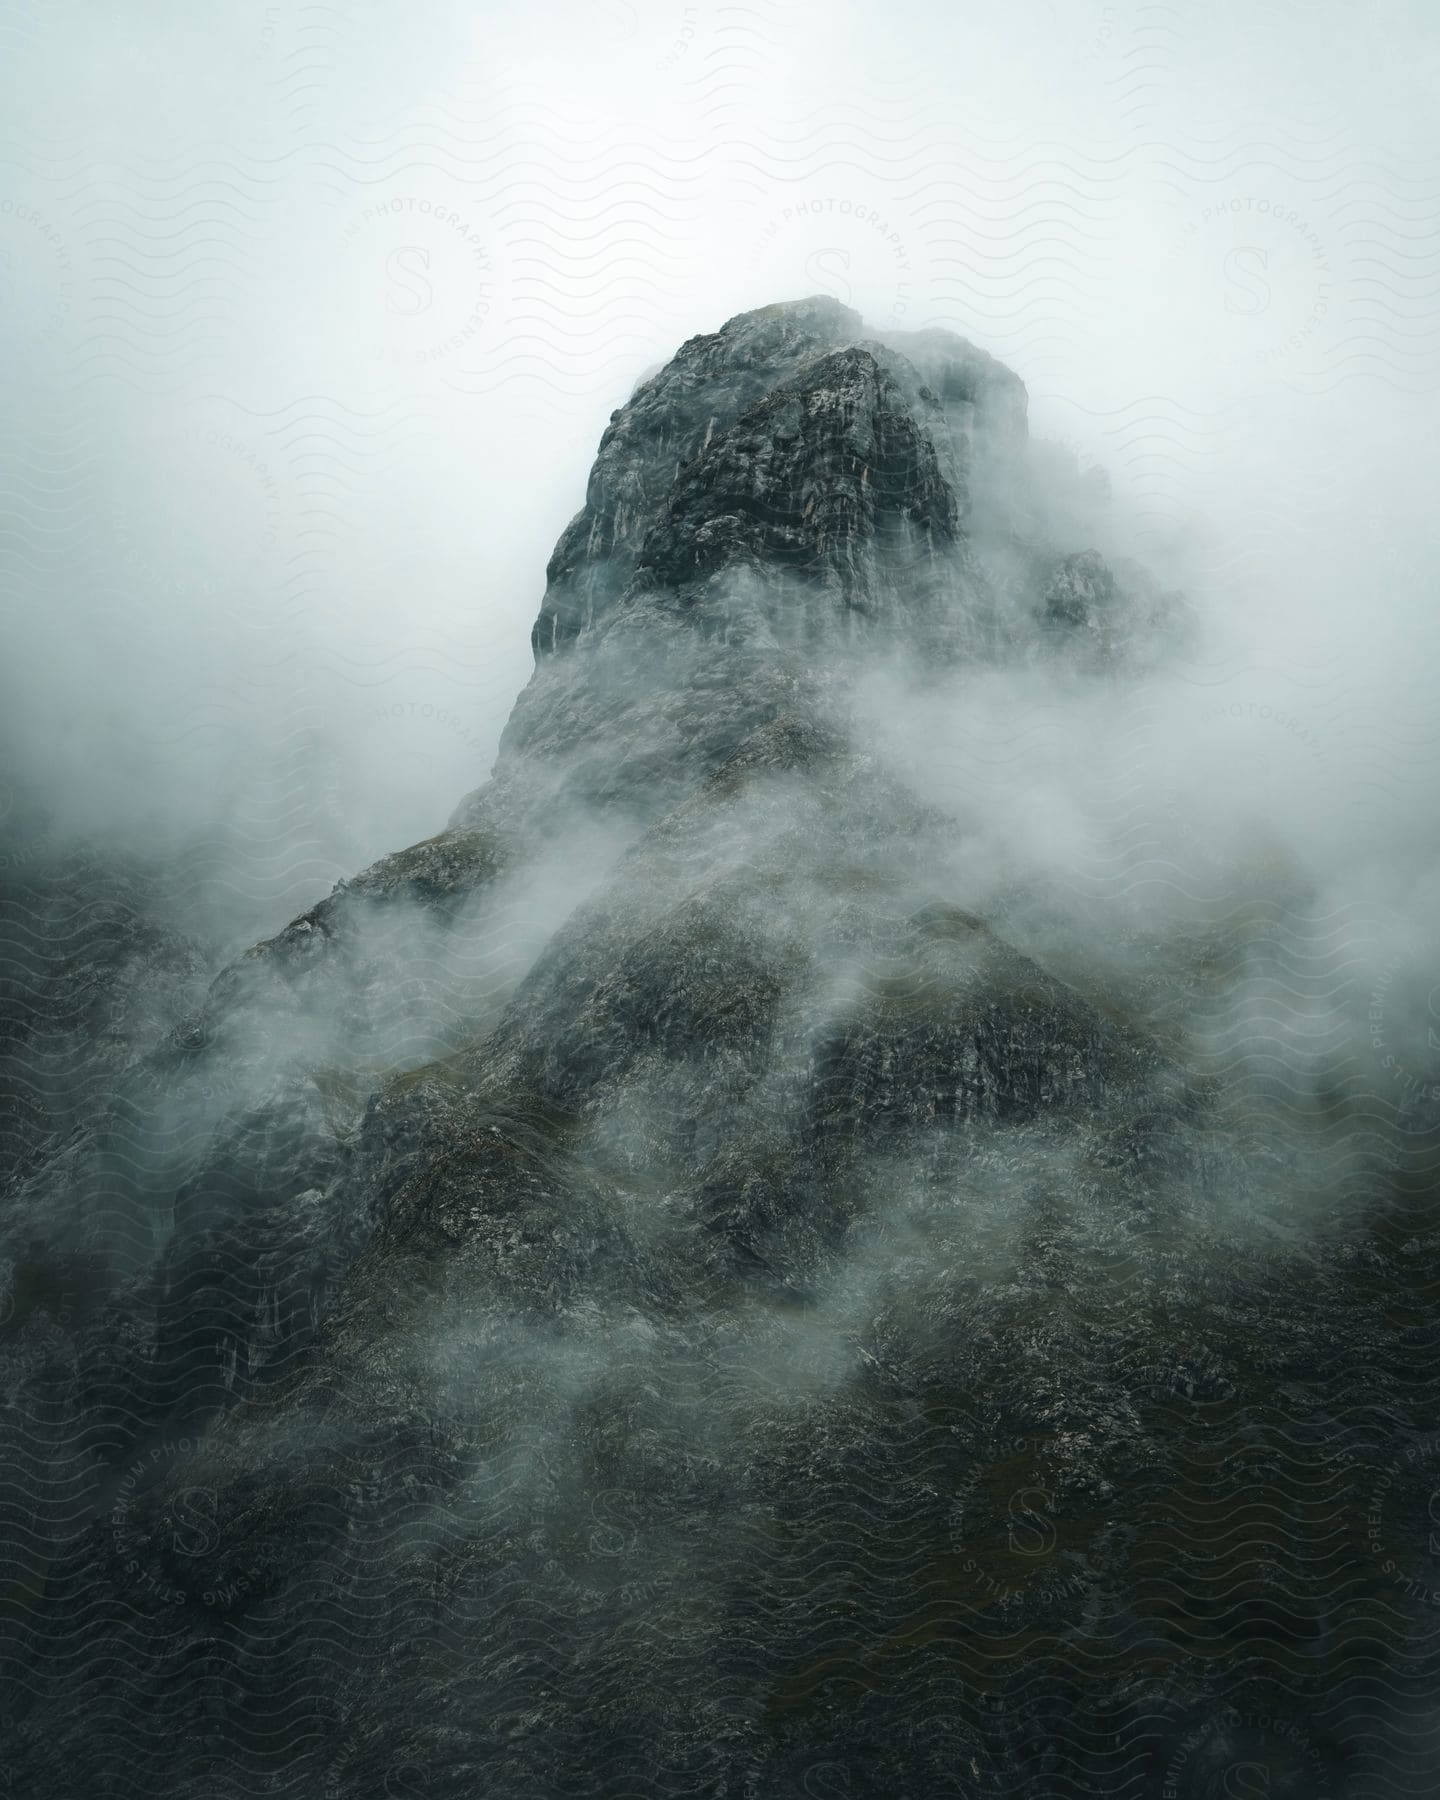 A mountain is shrouded in fog and clouds on an overcast day